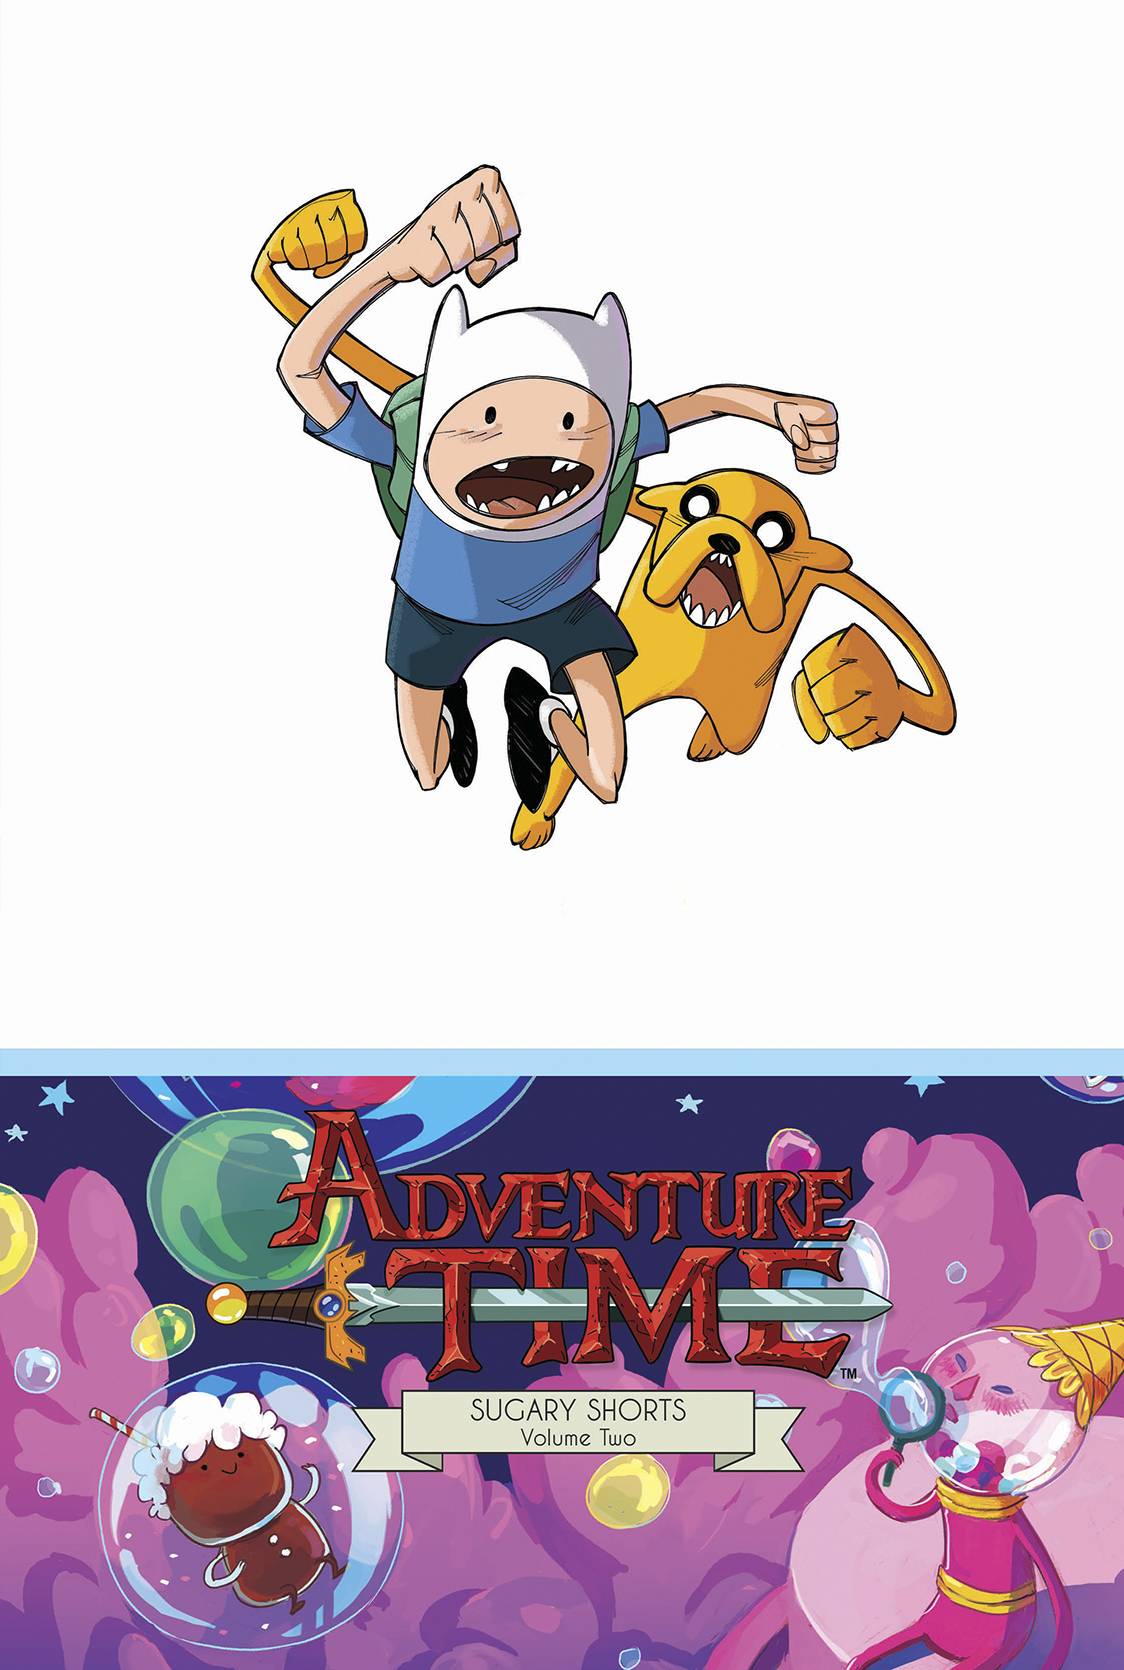 Adventure Time Sugary Shorts Hardcover Volume 2